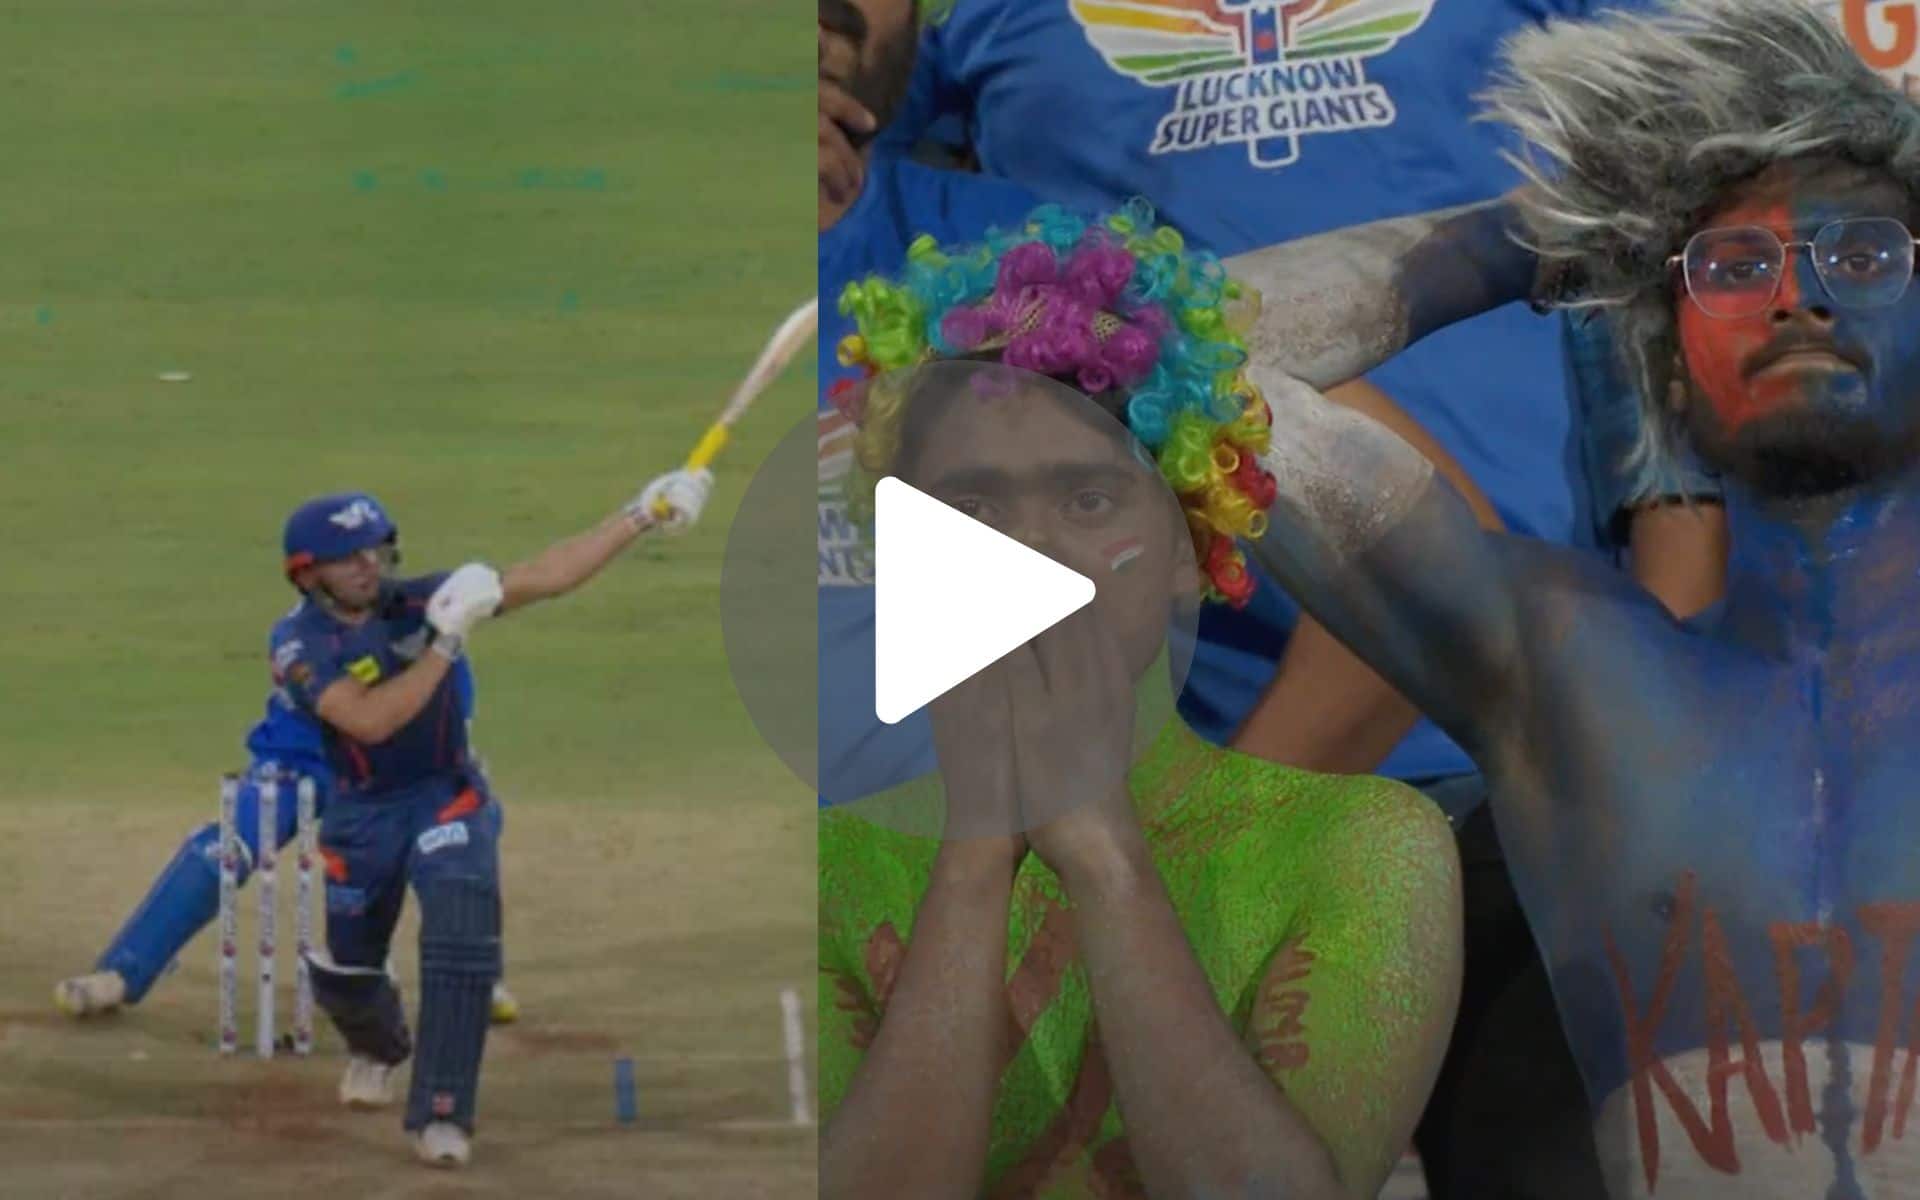 [Watch] Stoinis Goes Down As Varma's Blinder Near Ropes Gifts Pandya Another Wicket